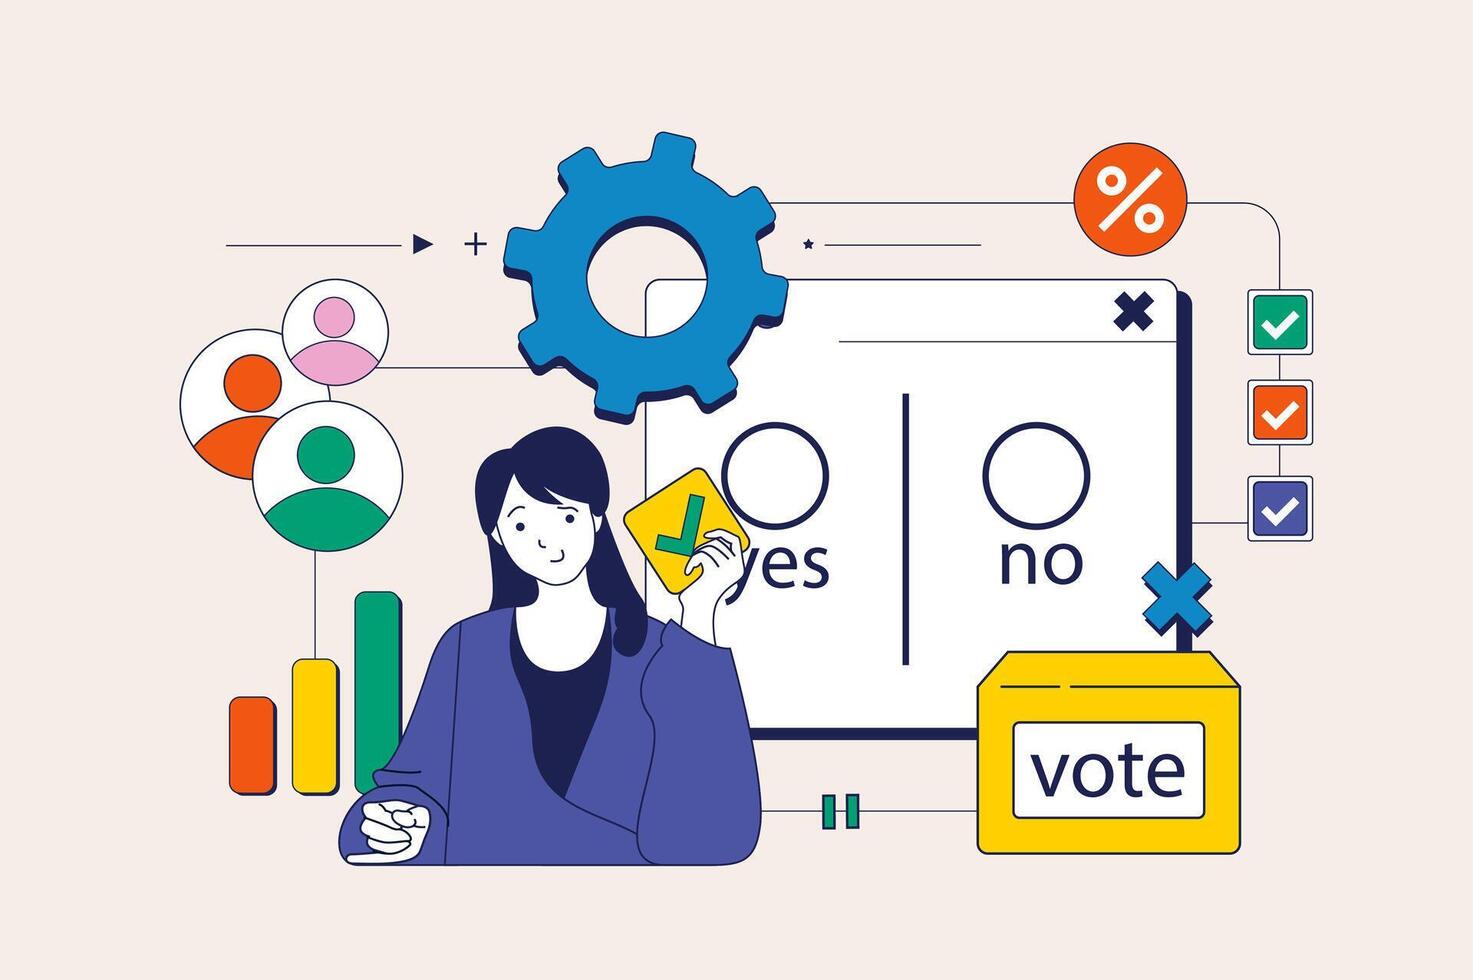 Online voting concept in flat neo brutalism design for web. Woman making decision and filling virtual vote form at democratic election. Vector illustration for social media banner, marketing material.